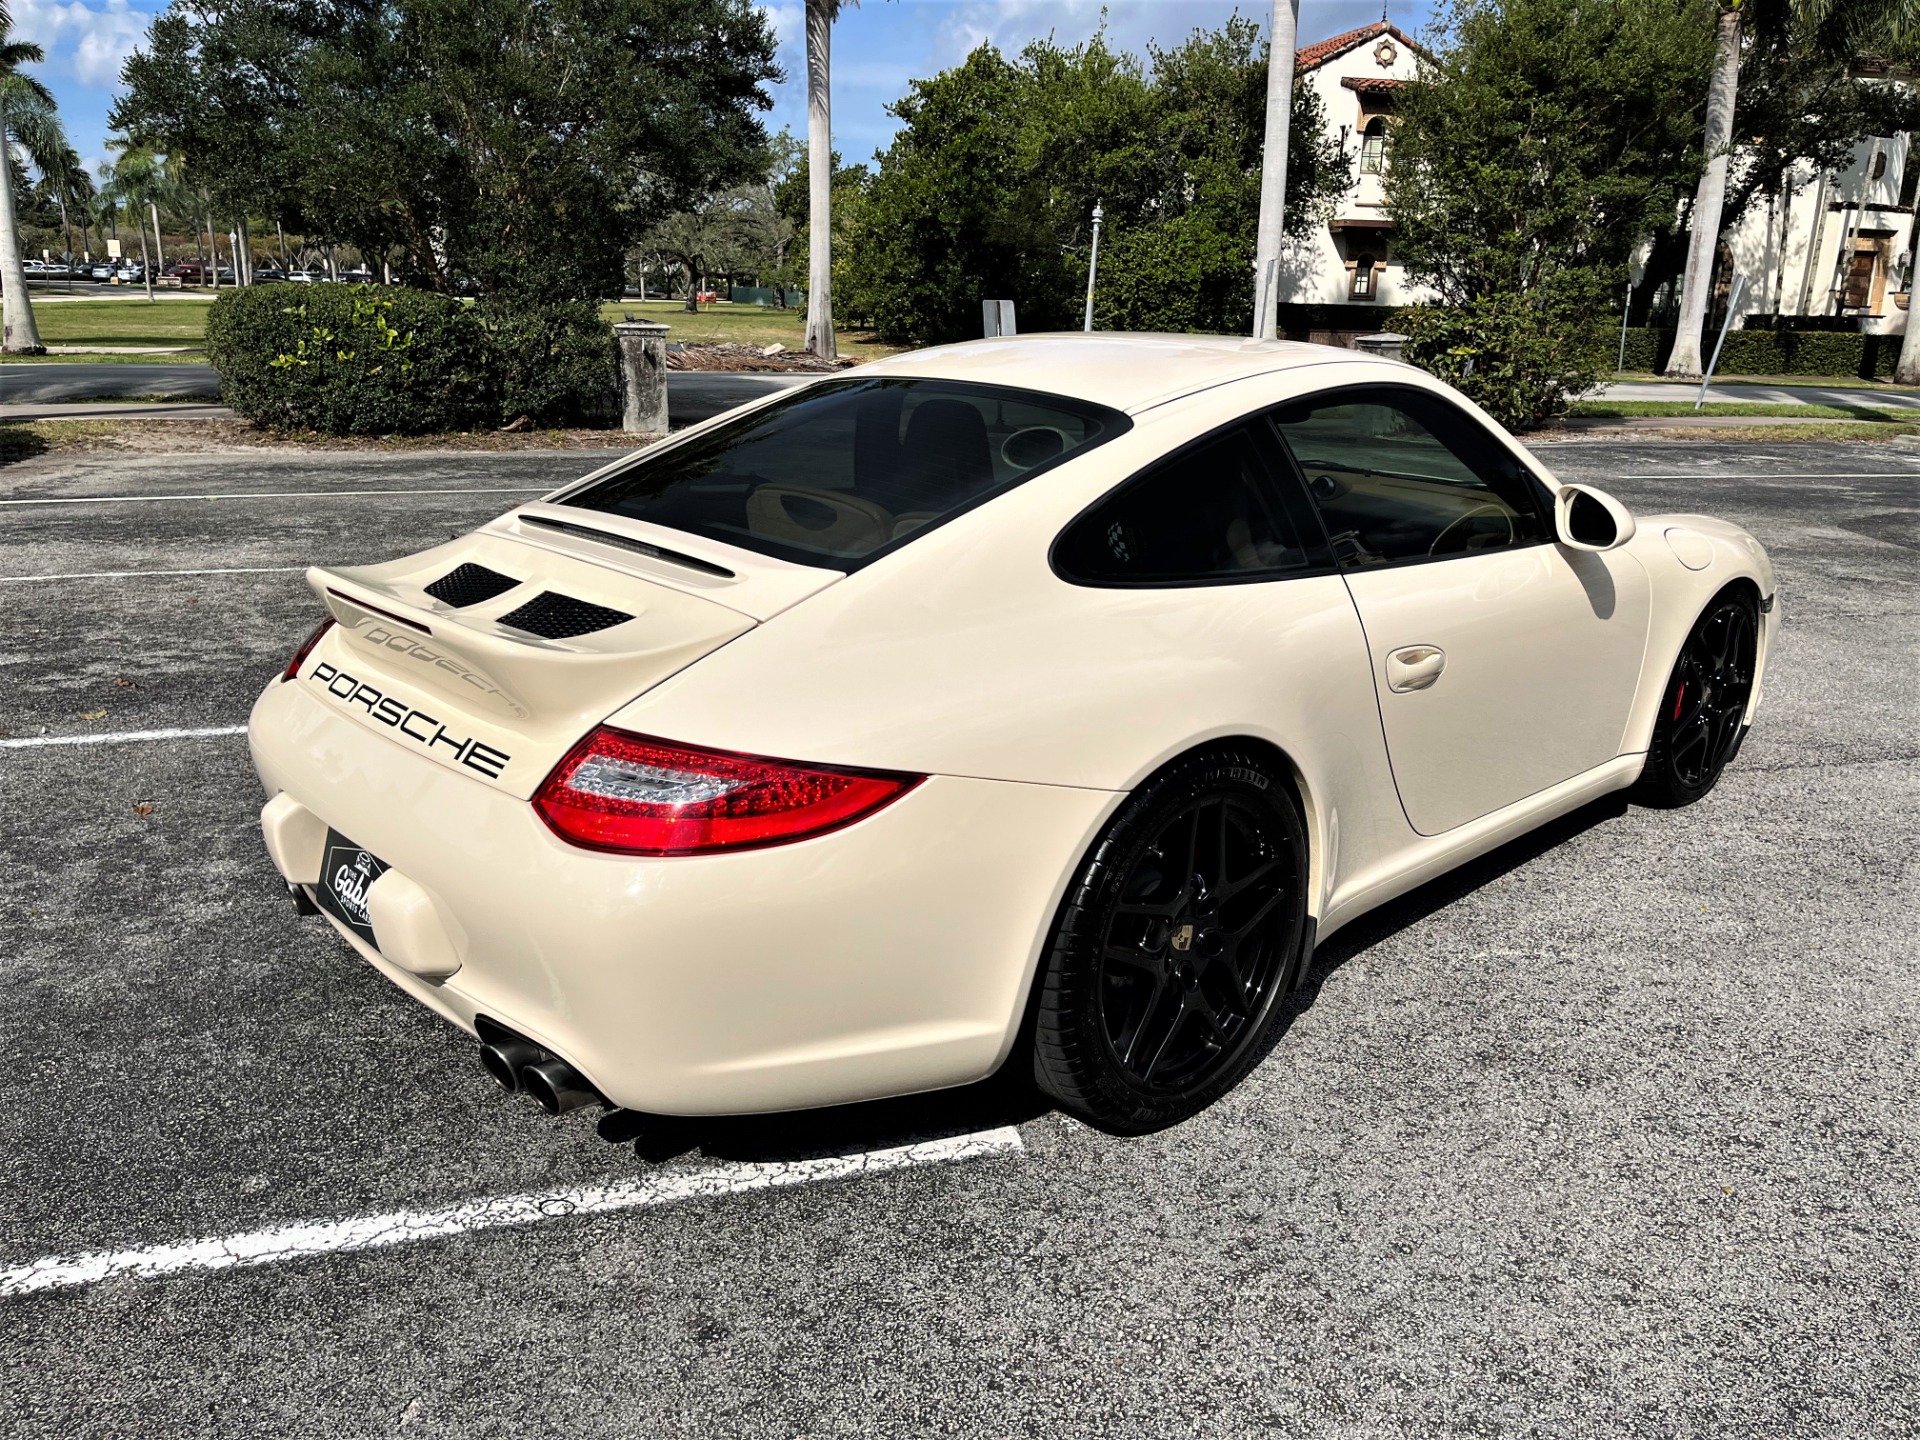 Used 2010 Porsche 911 Carrera S for sale Sold at The Gables Sports Cars in Miami FL 33146 1